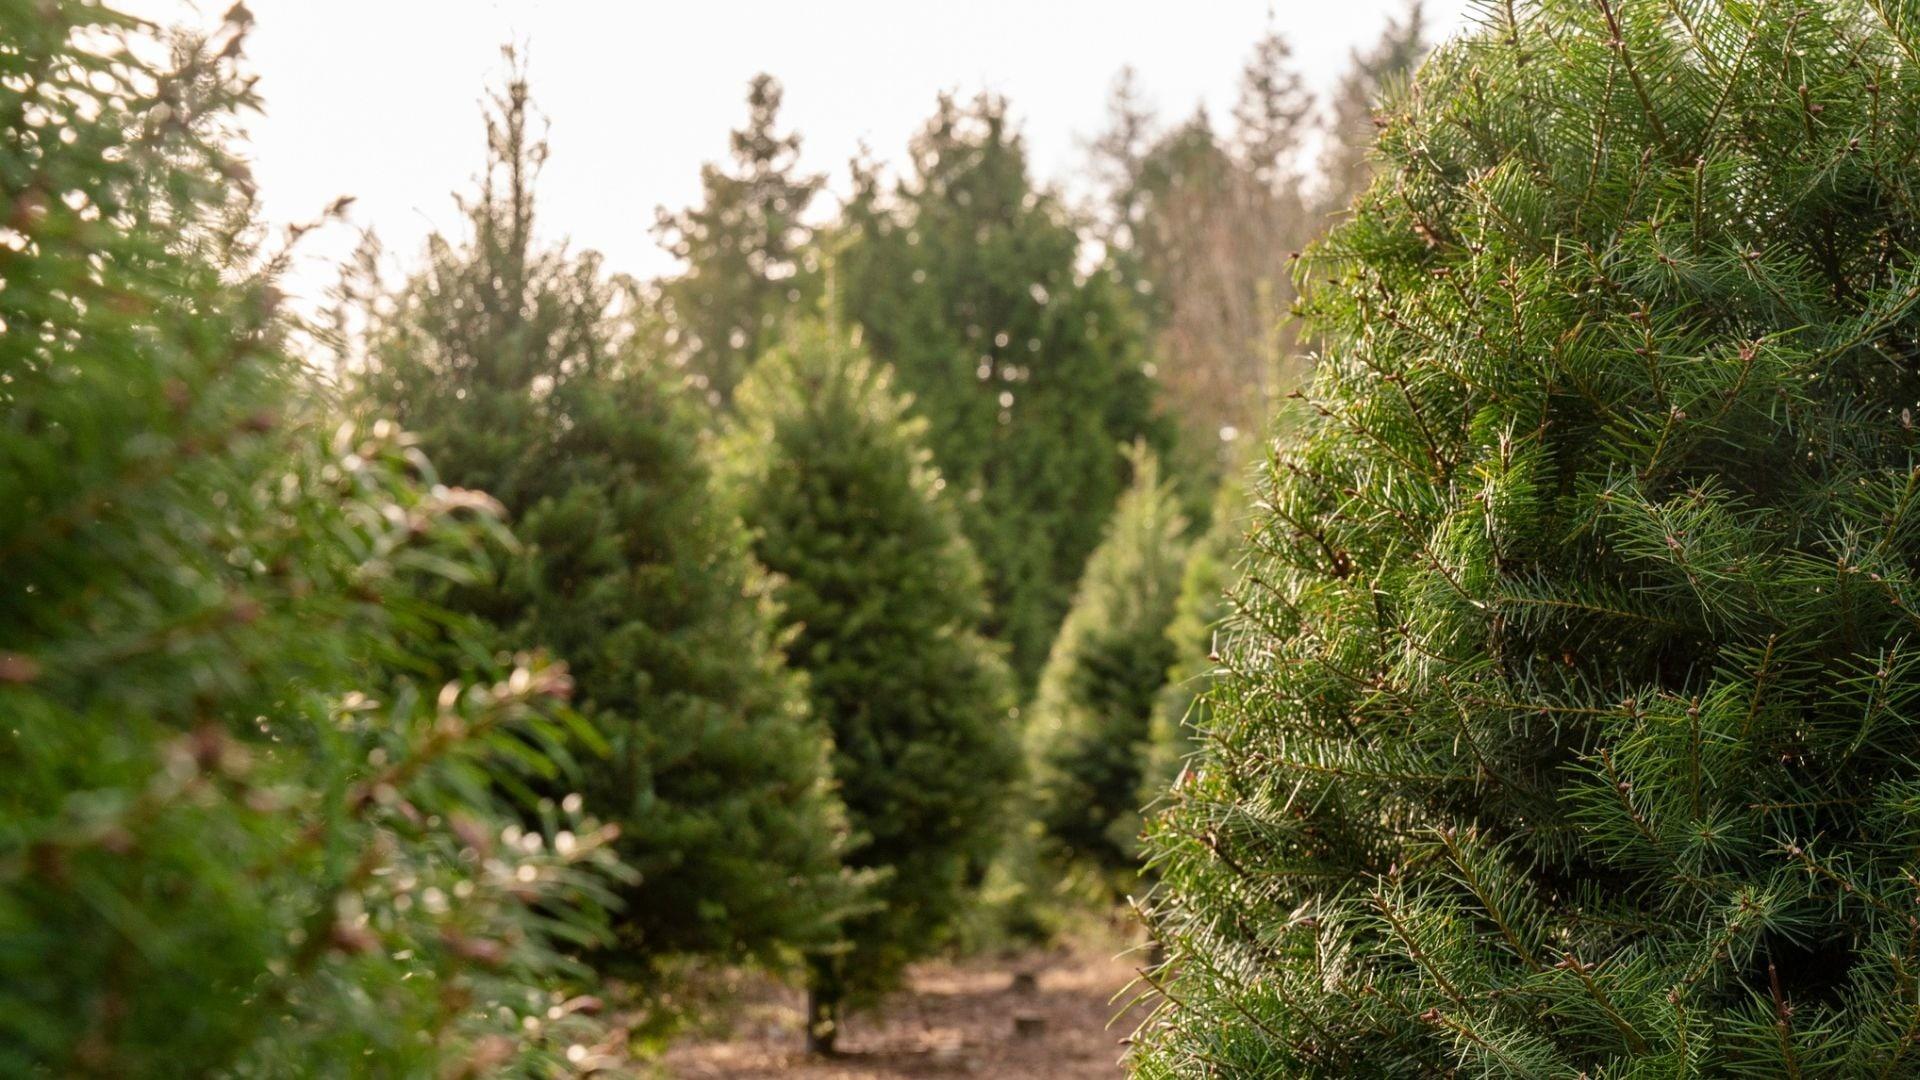 Can I plant my old christmas tree outside again in the spring?